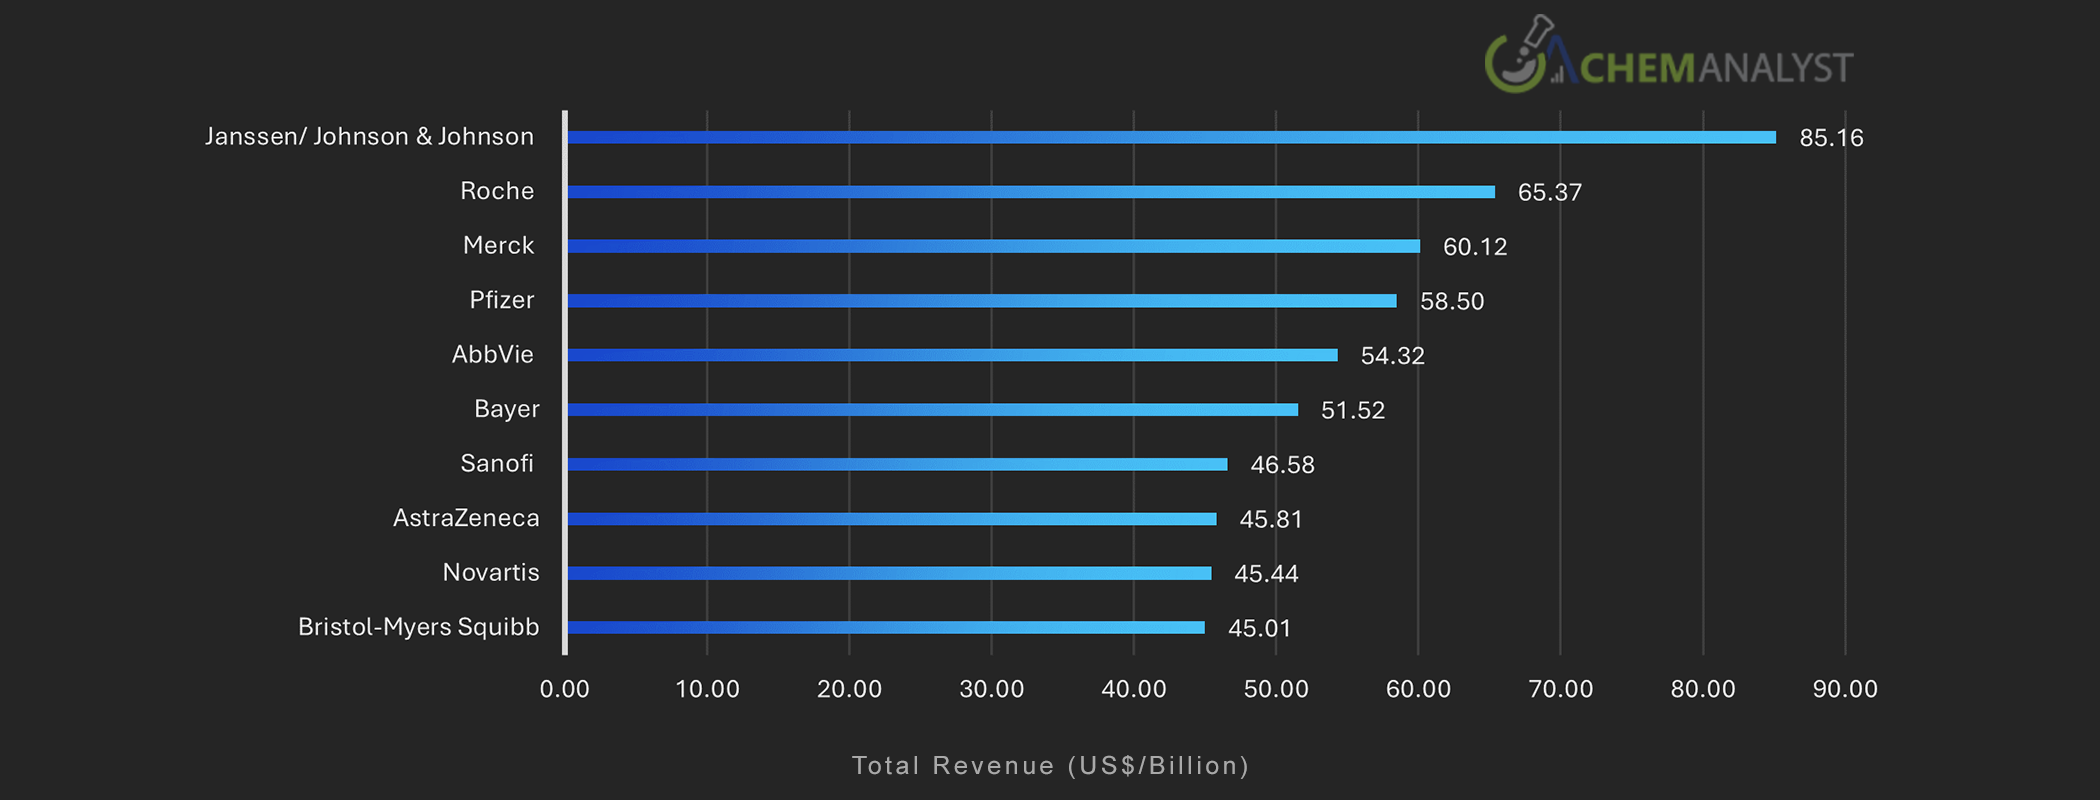 Top 10 Companies by Revenue